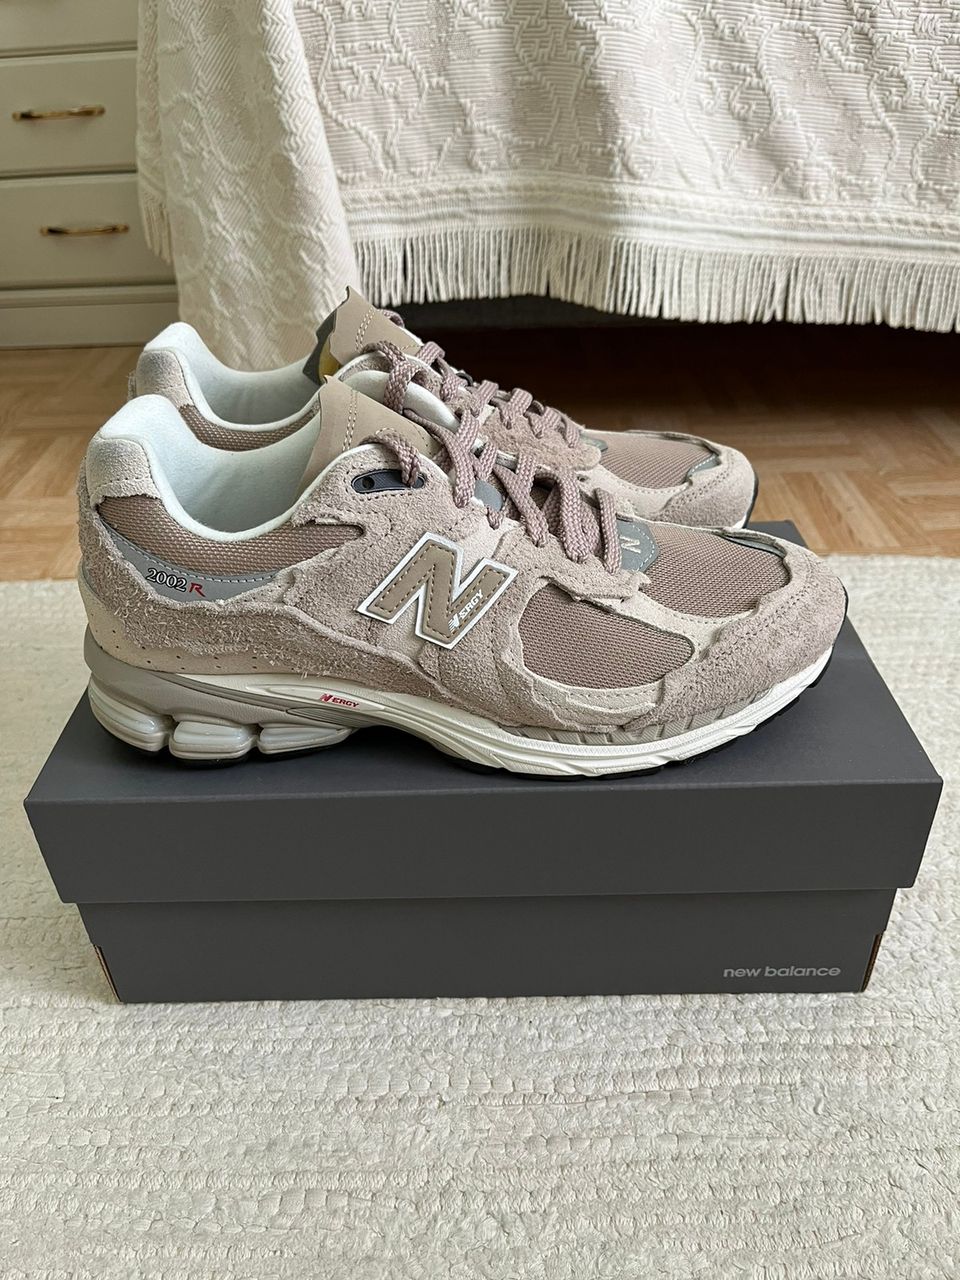 New Balance 2002R protection pack Driftwood